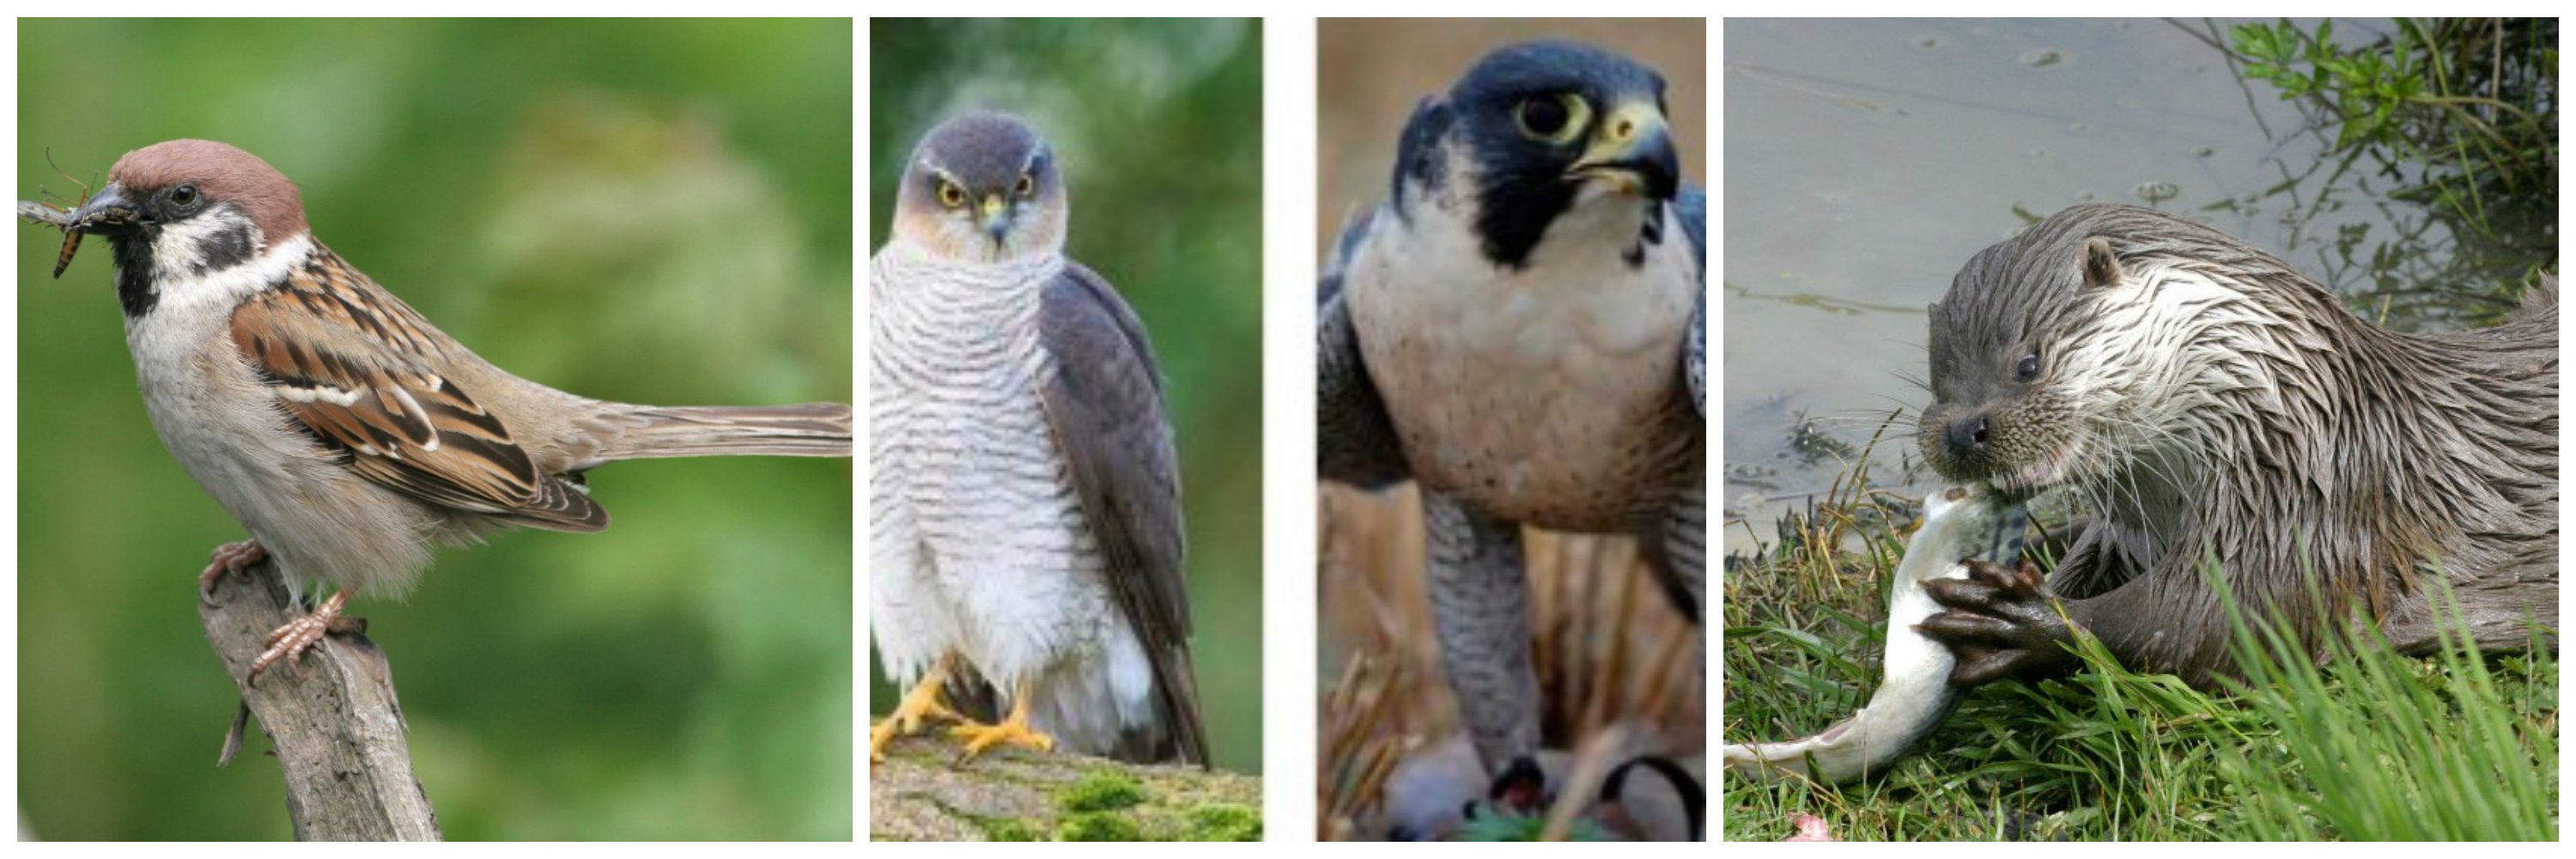 Tree sparrow (C Mike Snelle), Sparrowhawk, Peregrine falcon and Otter (C SWT)